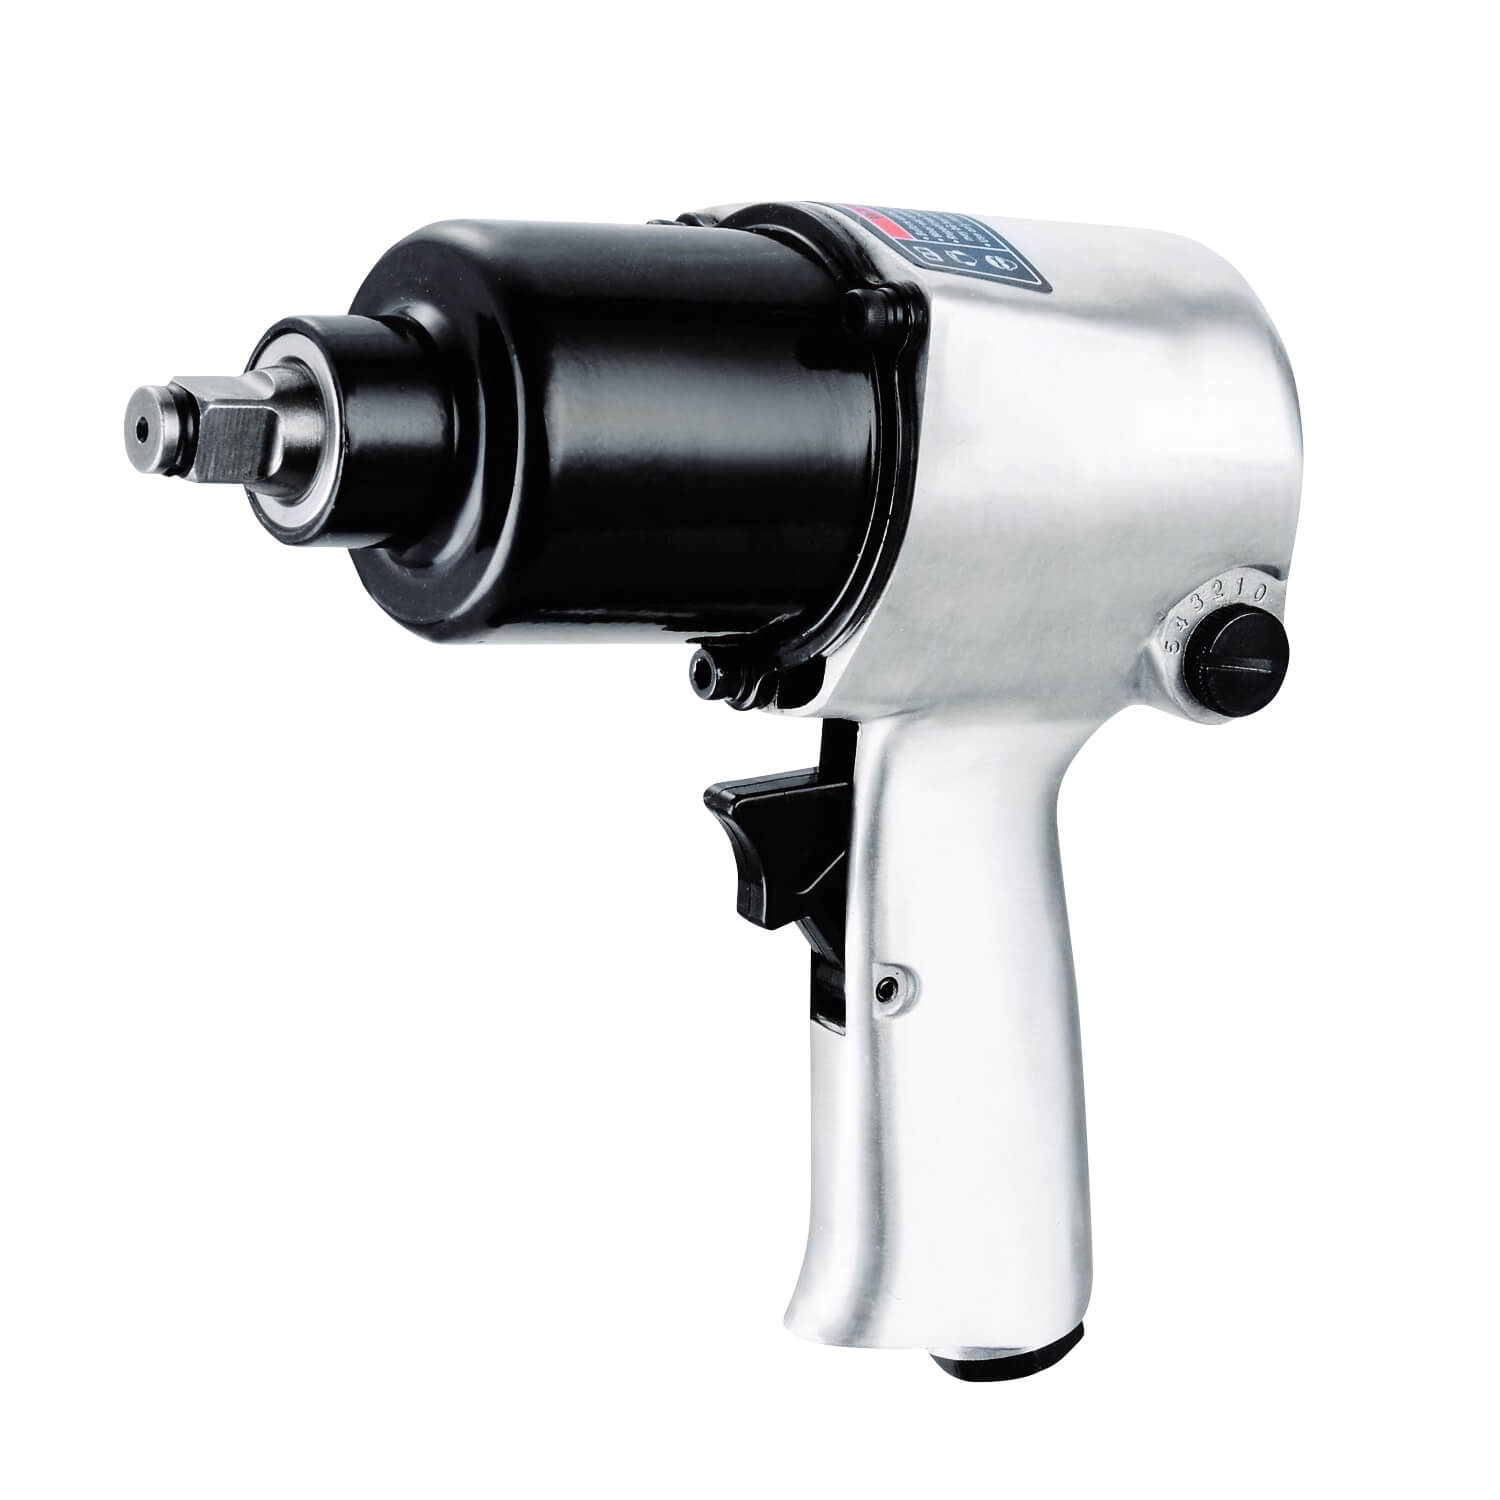 Tough & Rugged 1/2″ Square Drive Air Impact Wrench